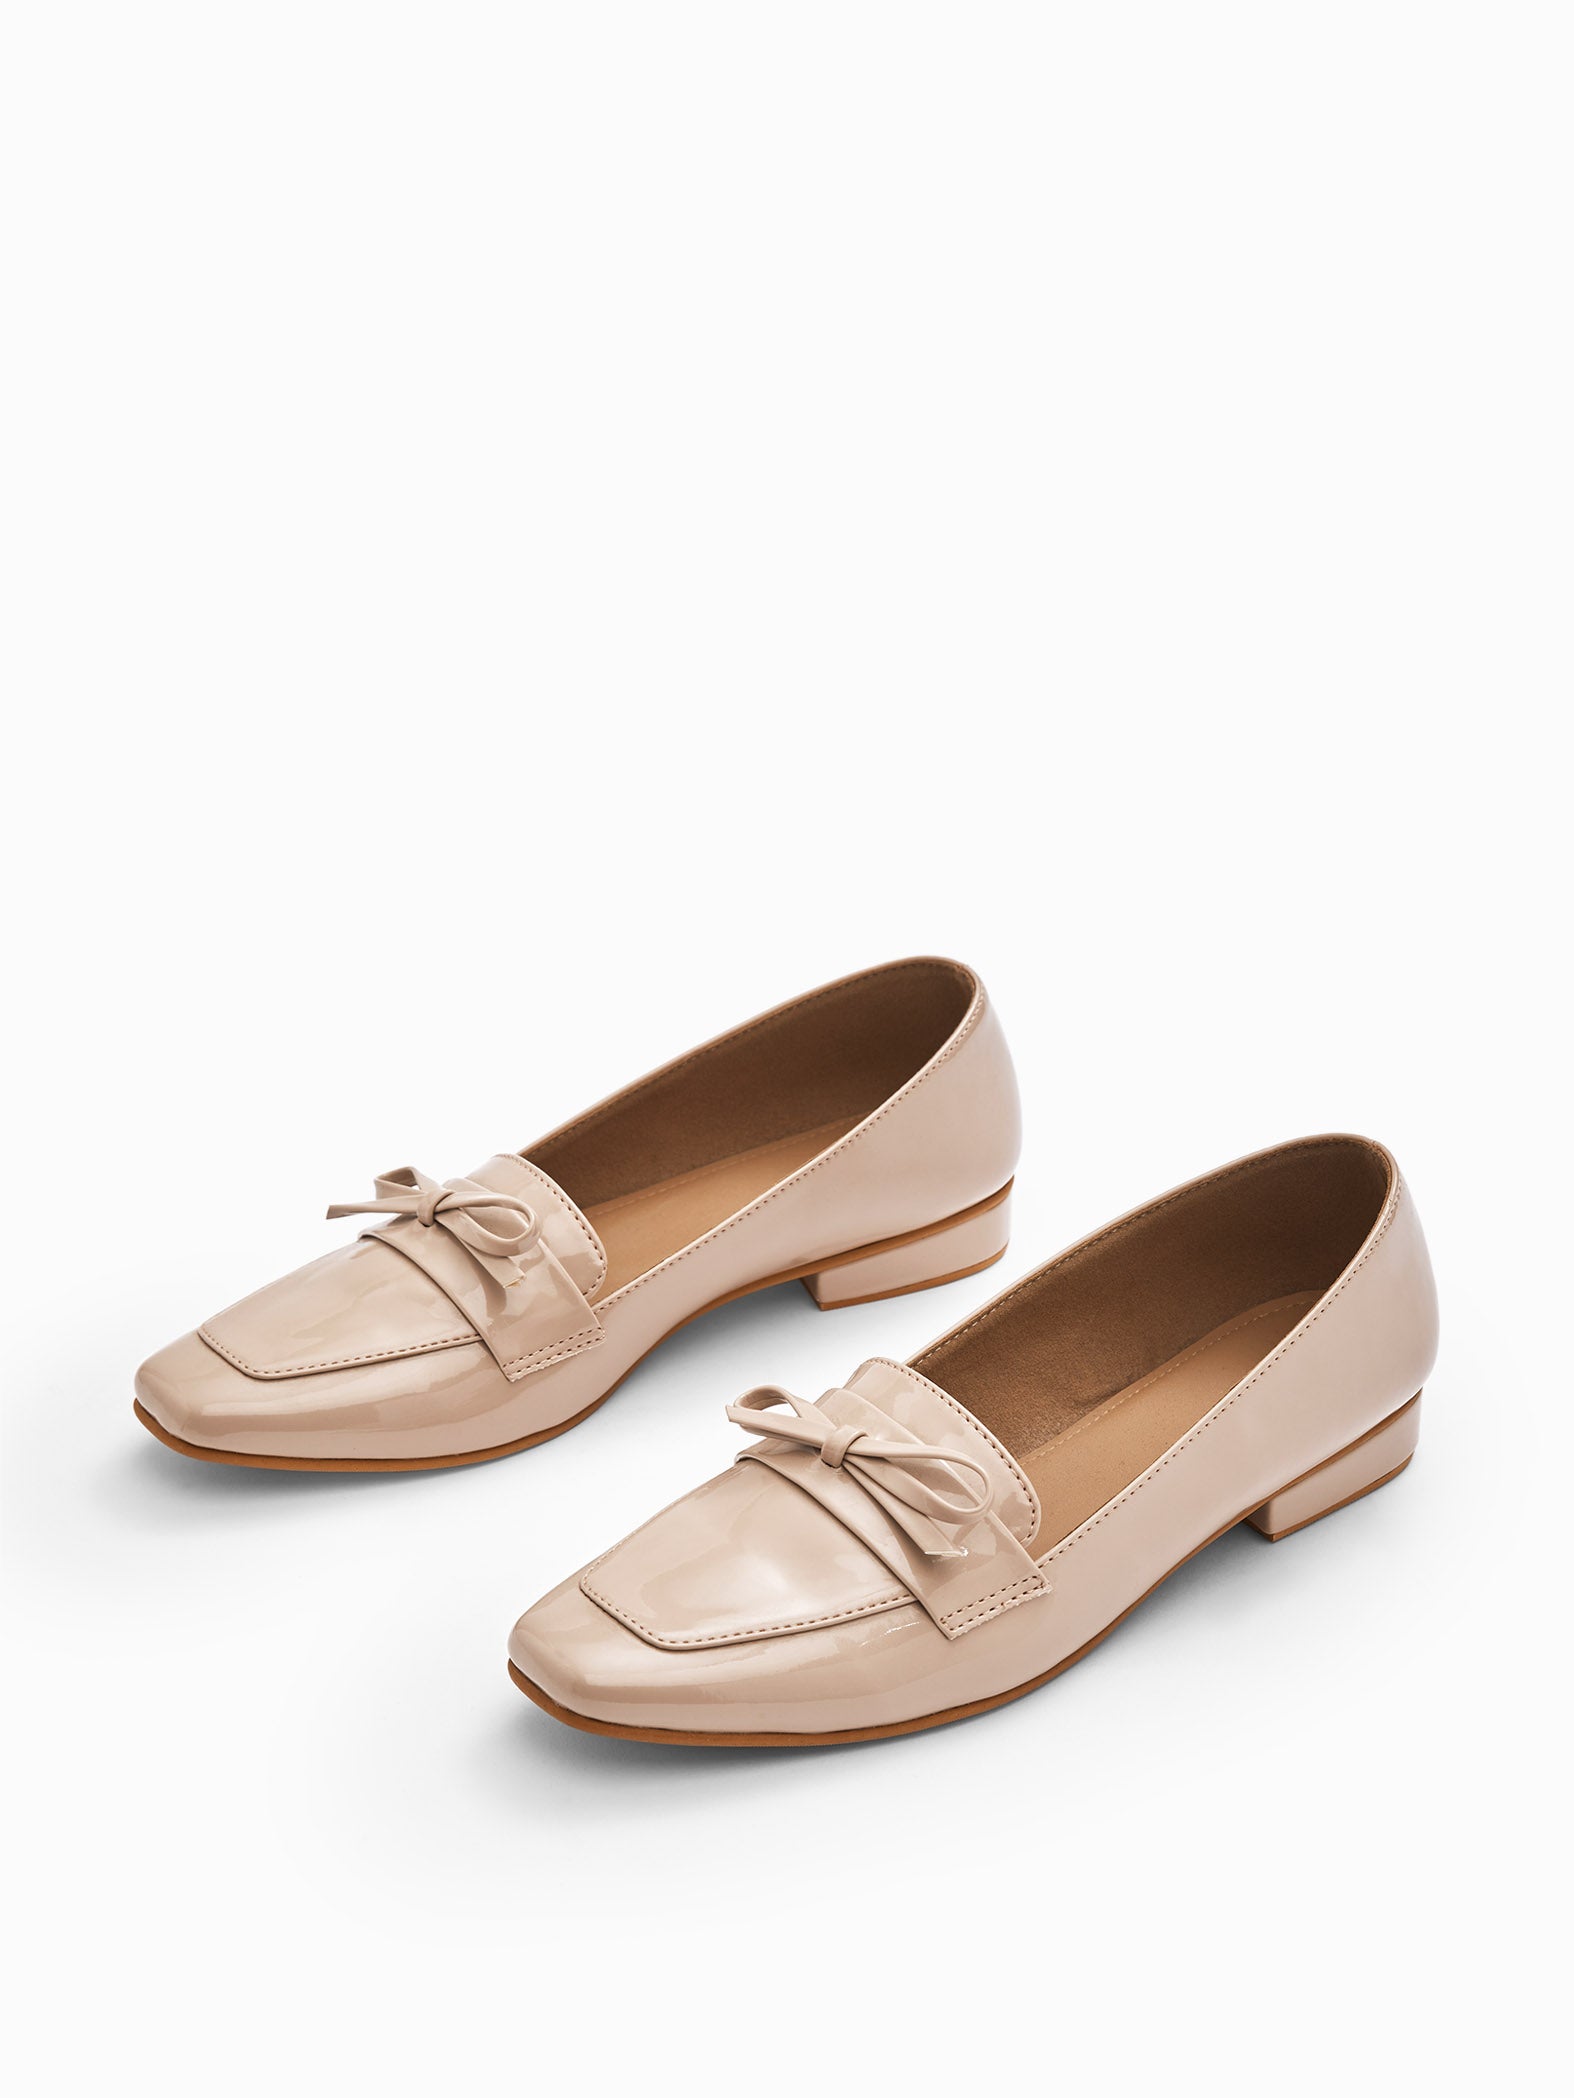 Nude Patent Pointed Toe Loafers